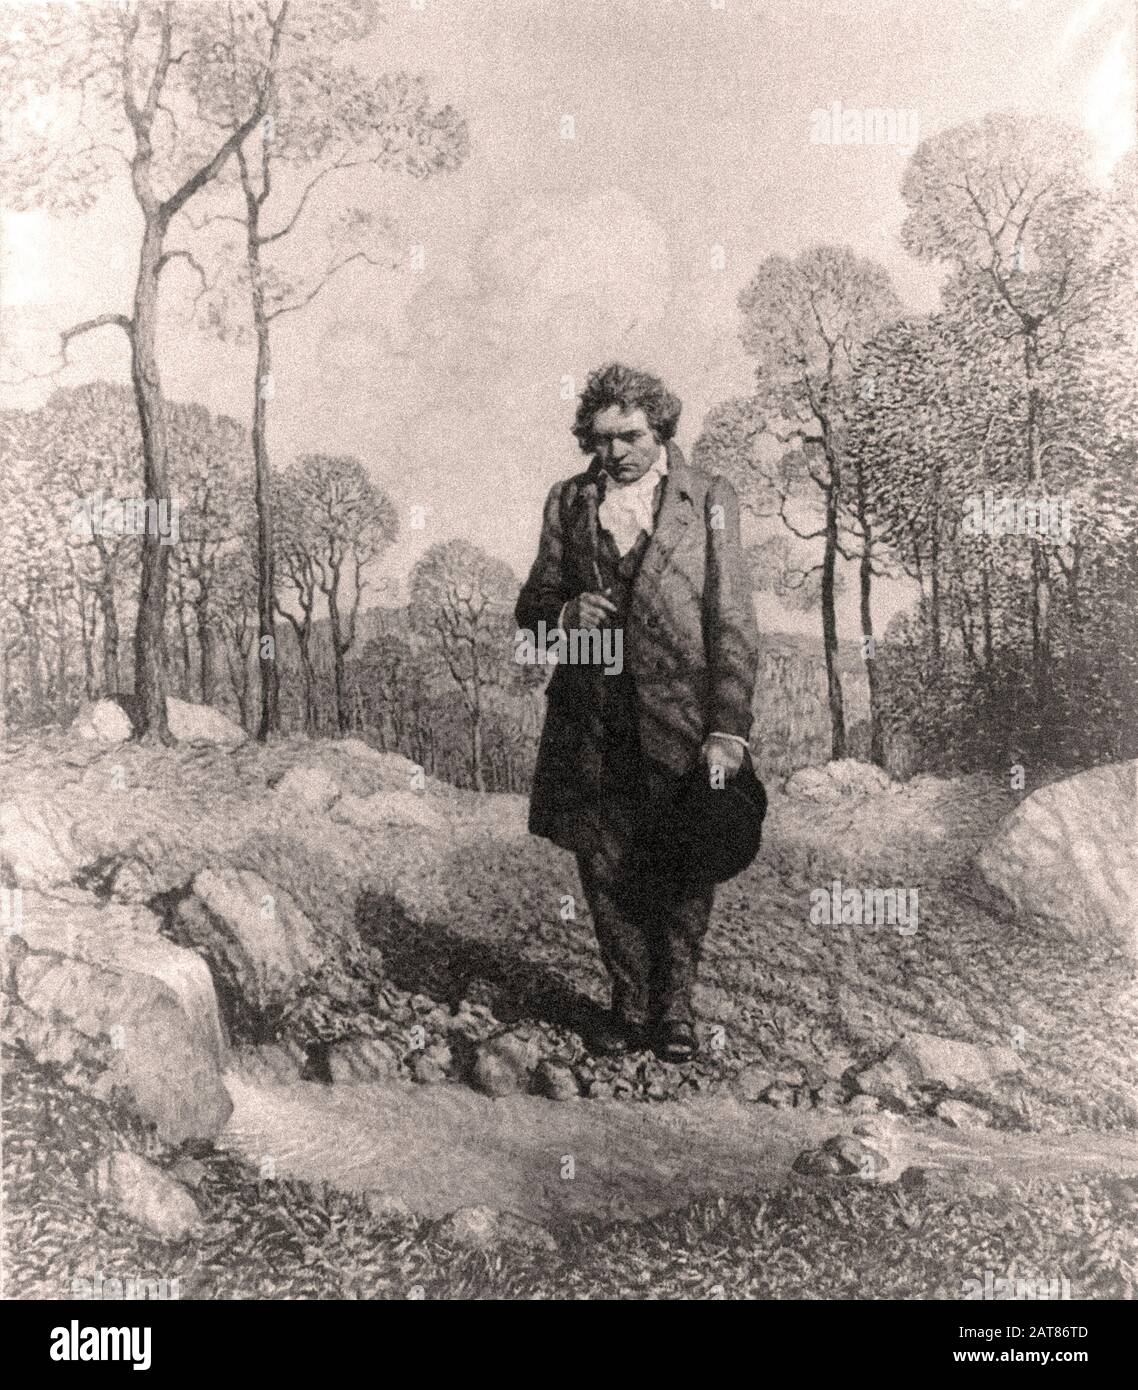 Ludwig Van Beethoven front view of man deep in thought, standing with hat in hand, on bank of stream near small waterfalls - print  1918 Stock Photo